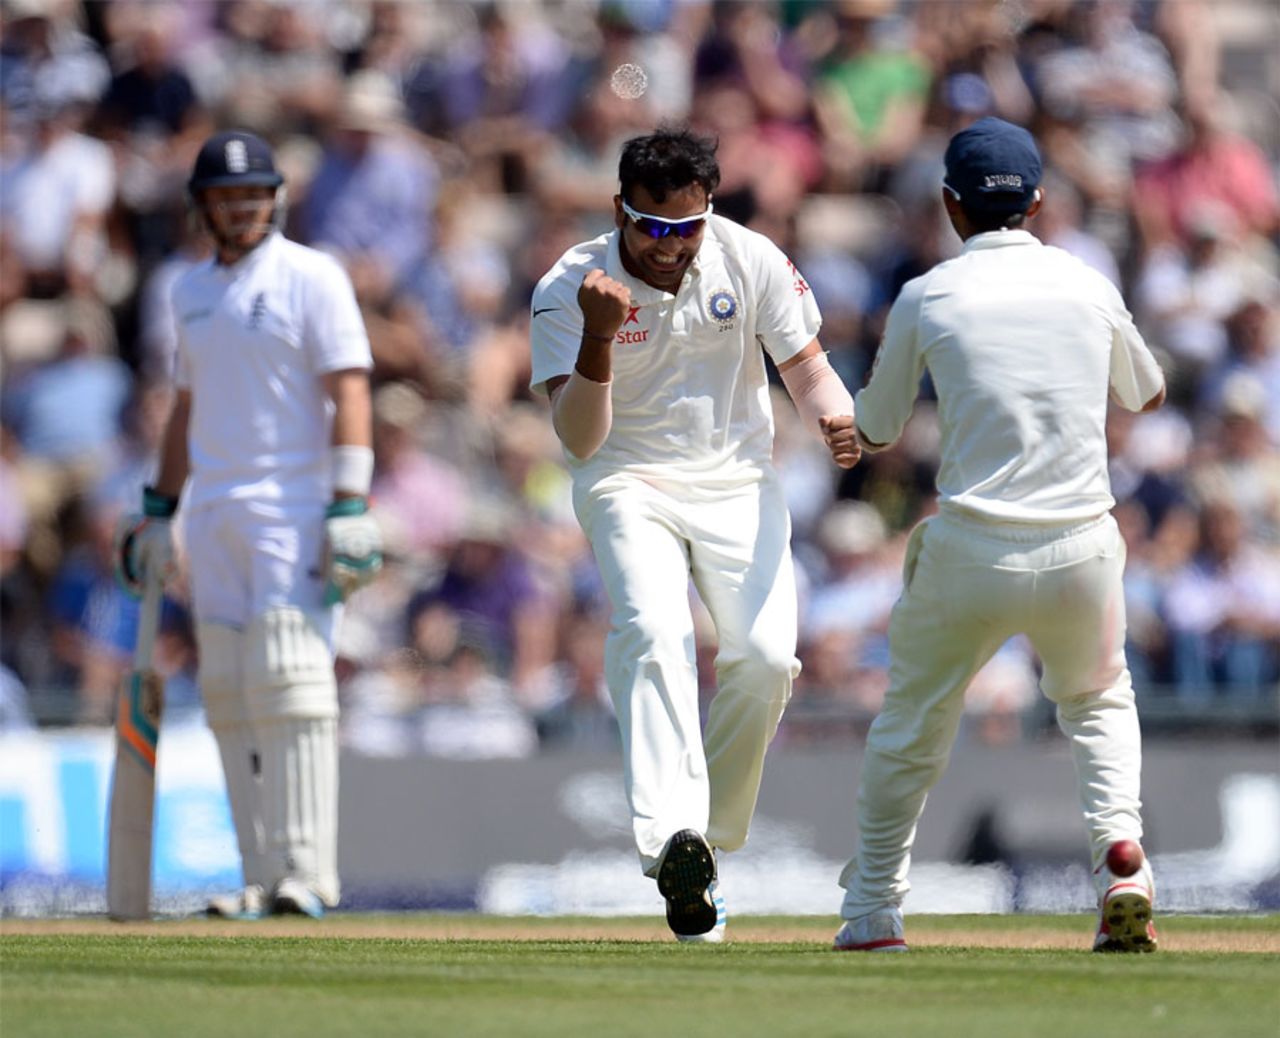 Rohit Sharma is elated with the wicket of Gary Ballance, England v India, 3rd Investec Test, Ageas Bowl, 2nd day, July 28, 2014